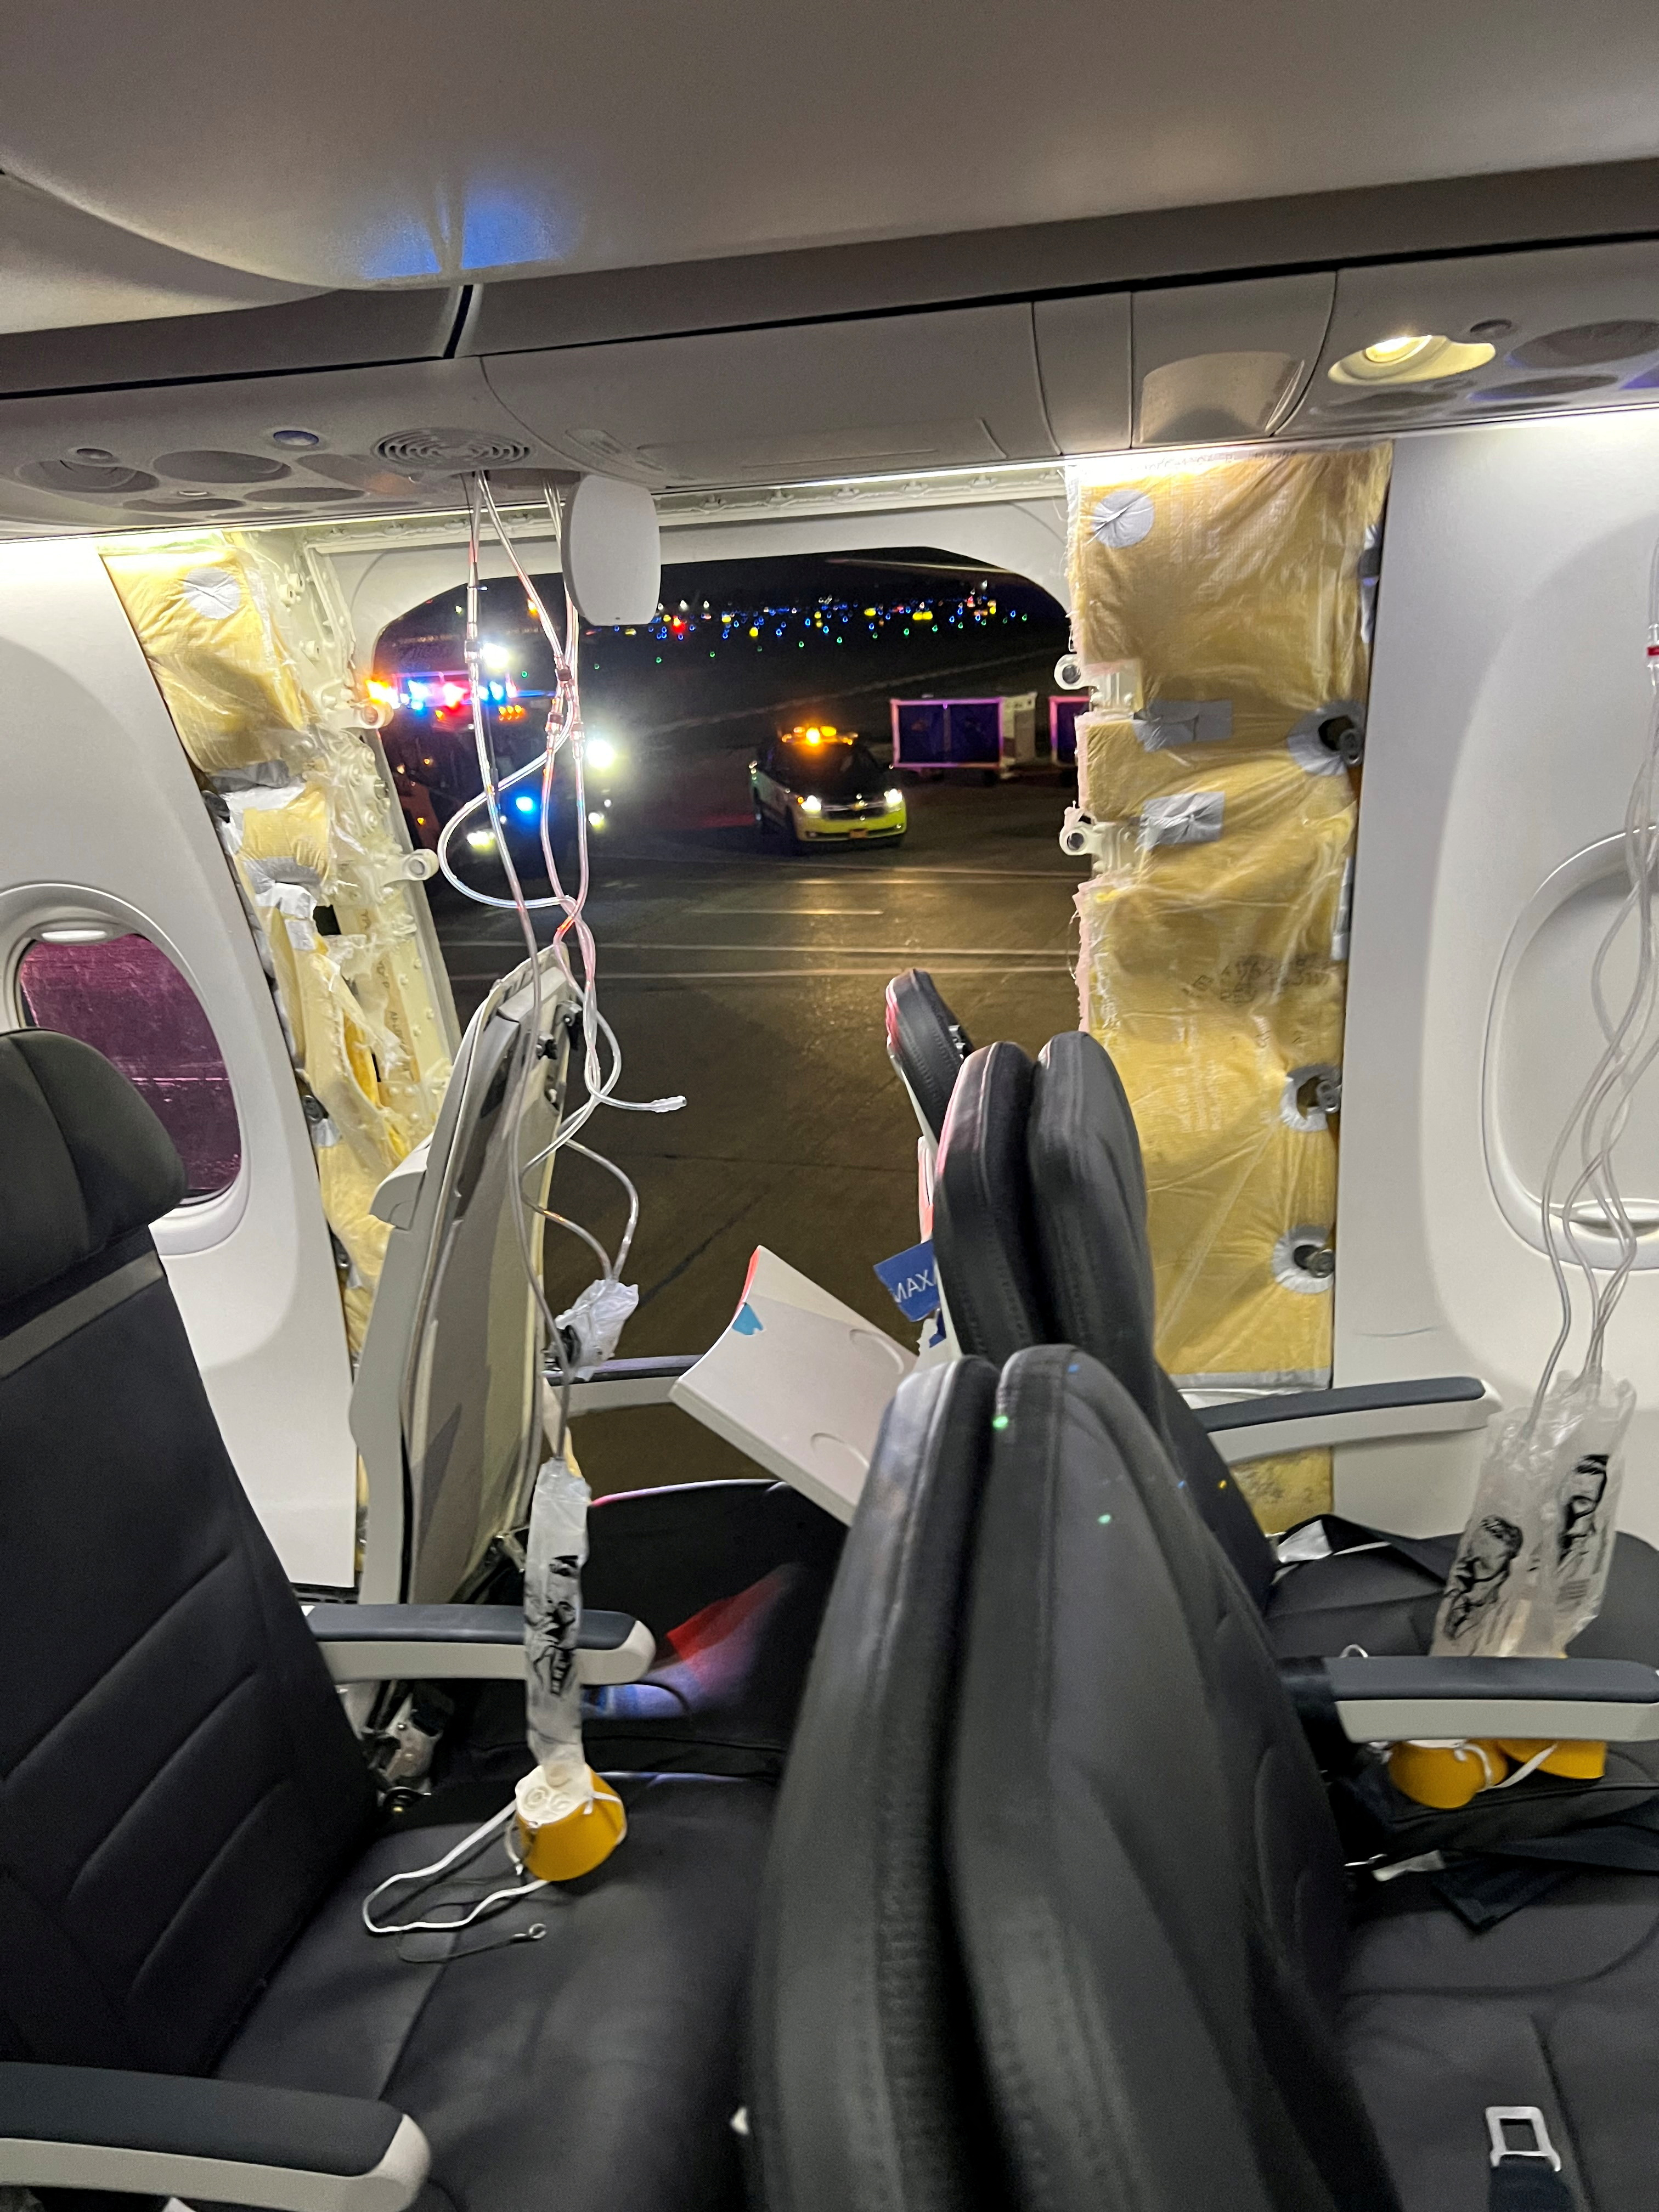 Passenger oxygen masks hang from the roof next to the missing door on the Alaska Airlines flight